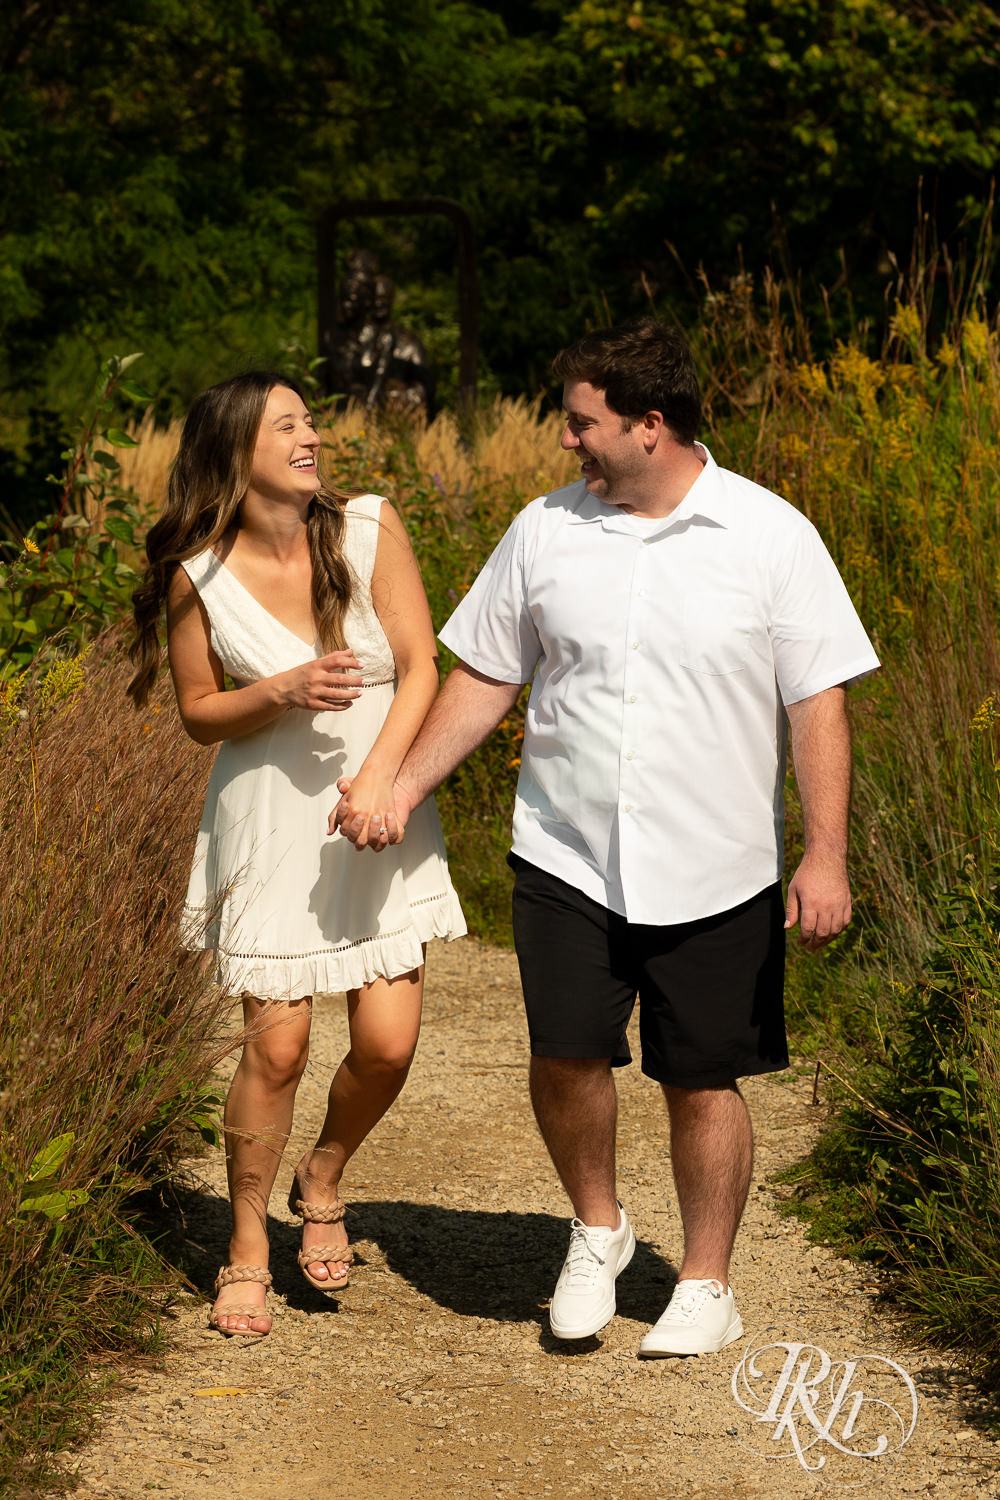 Man and woman in white dress walk together during engagement photography at Centennial Lakes Park in Edina, Minnesota.